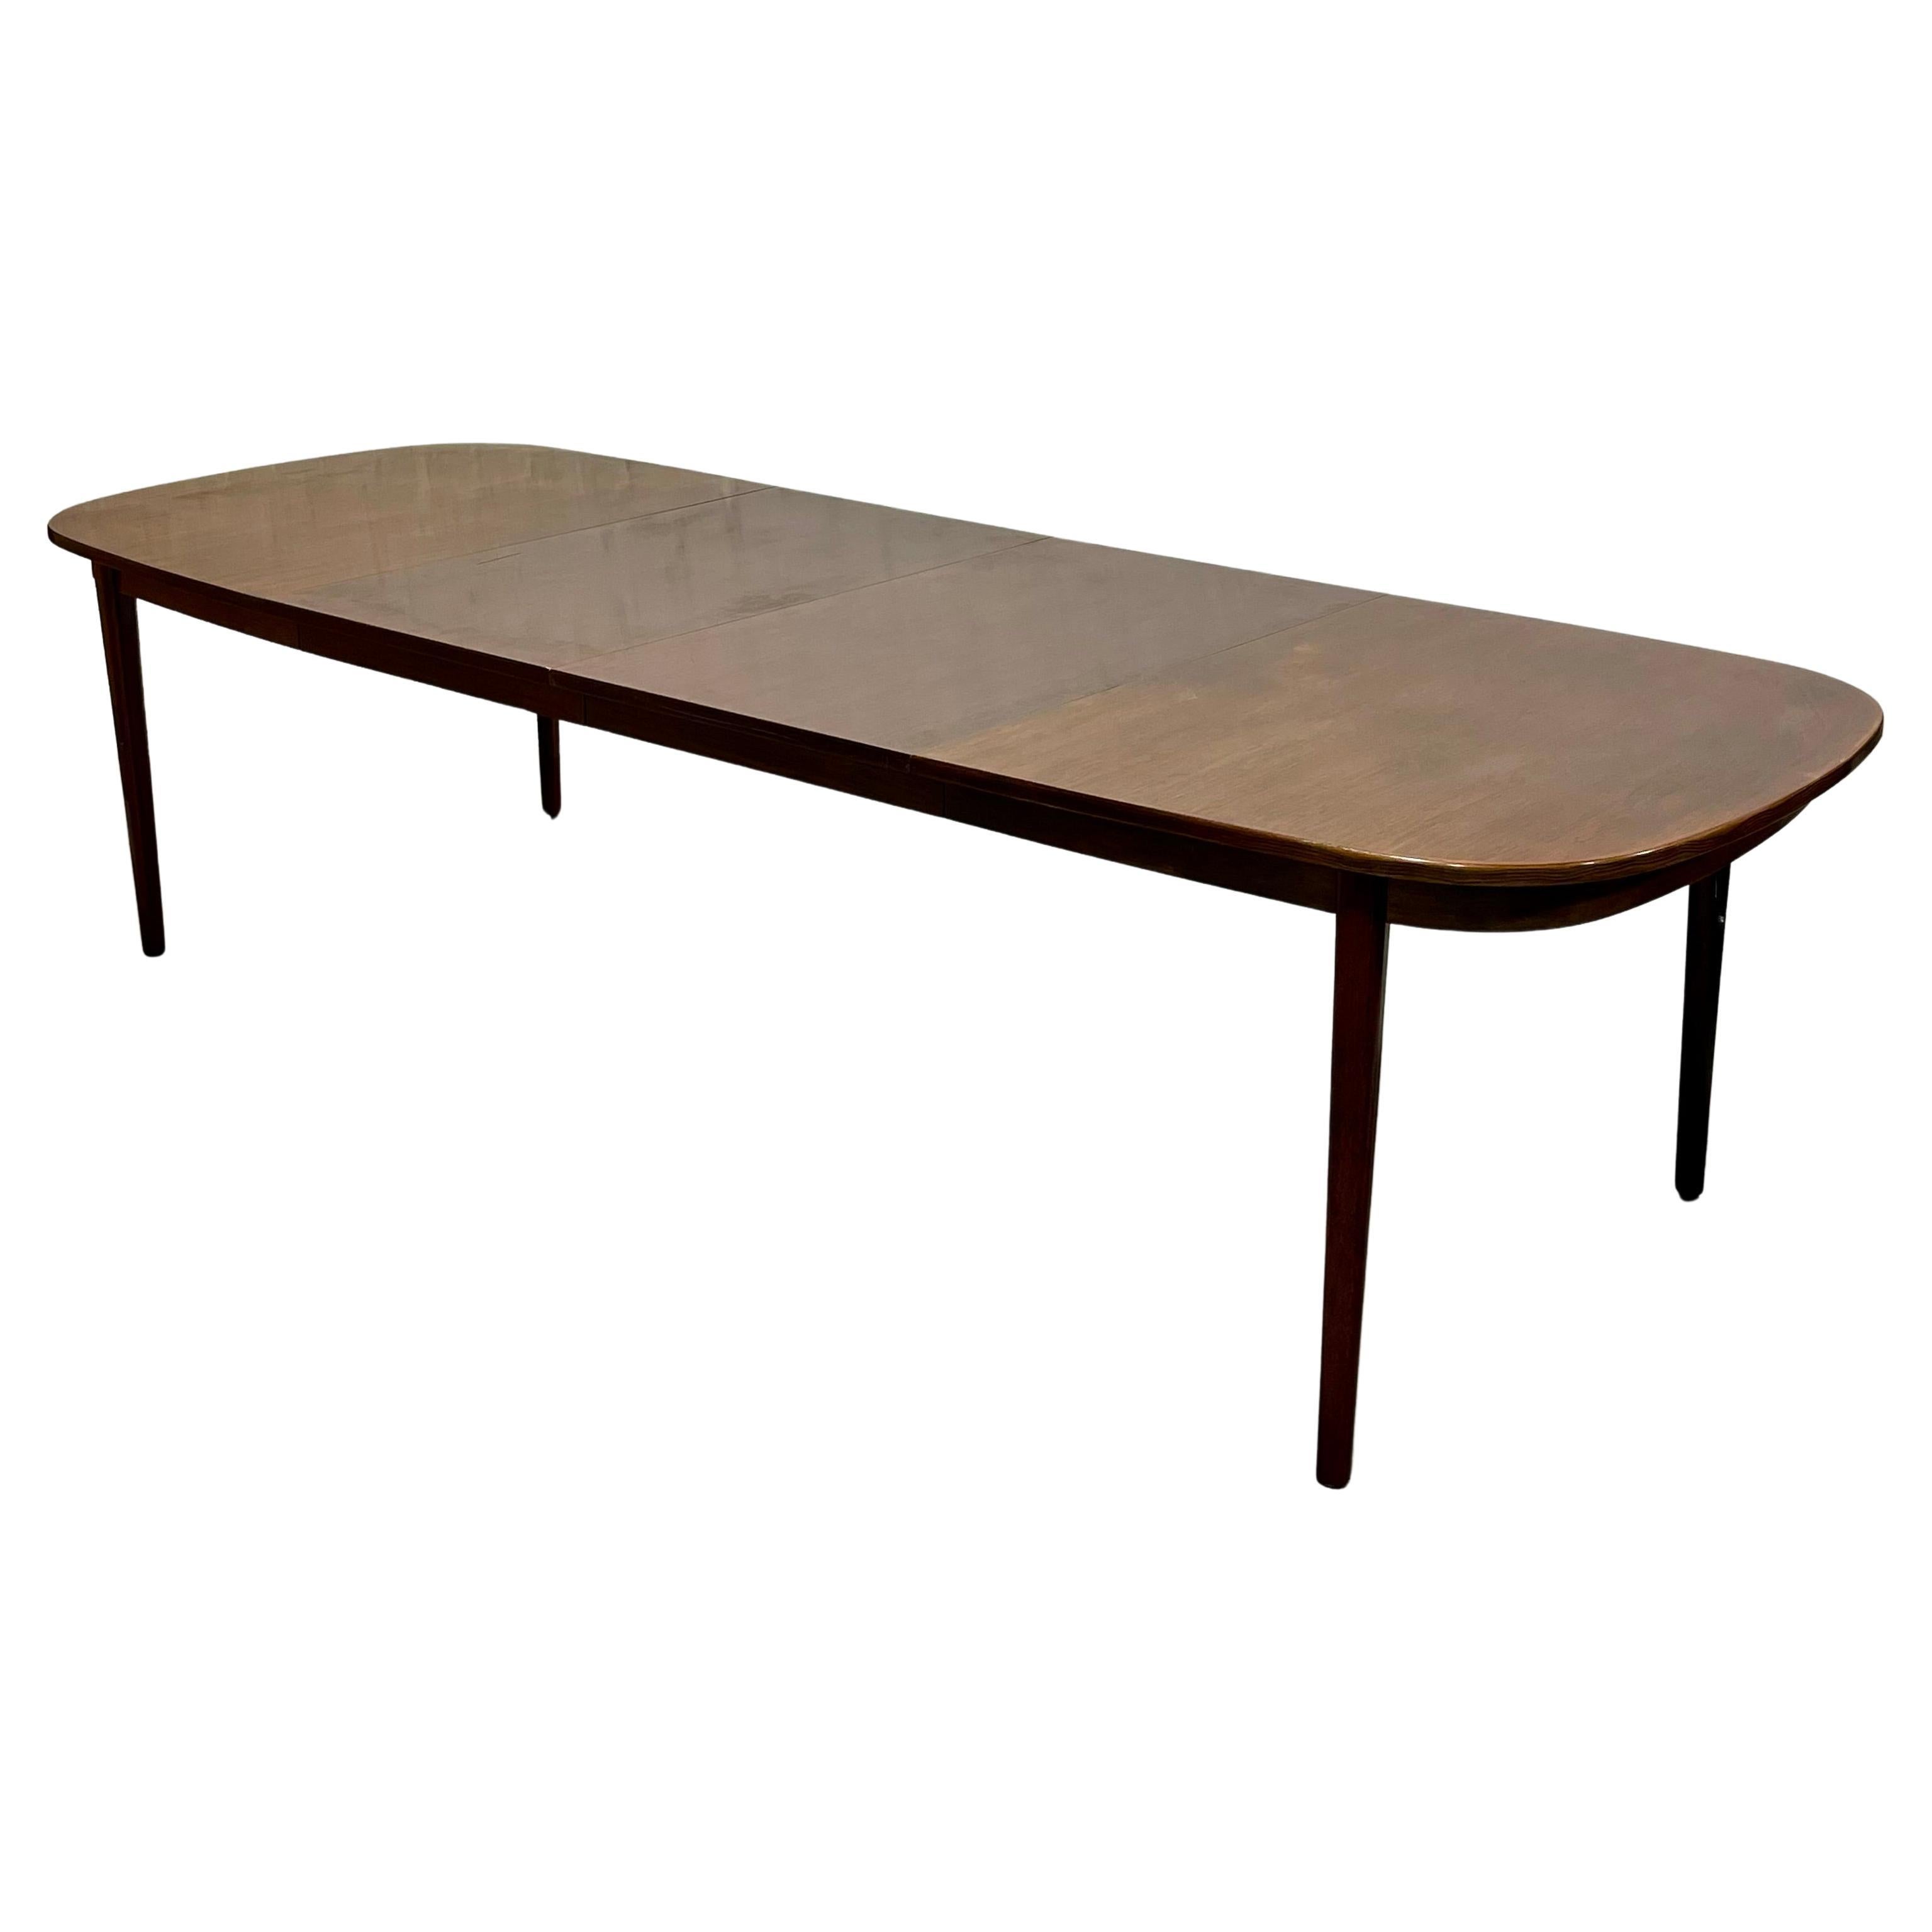 Extra LONG Mid Century Modern ROSEWOOD DINING Table, c. 1960’s